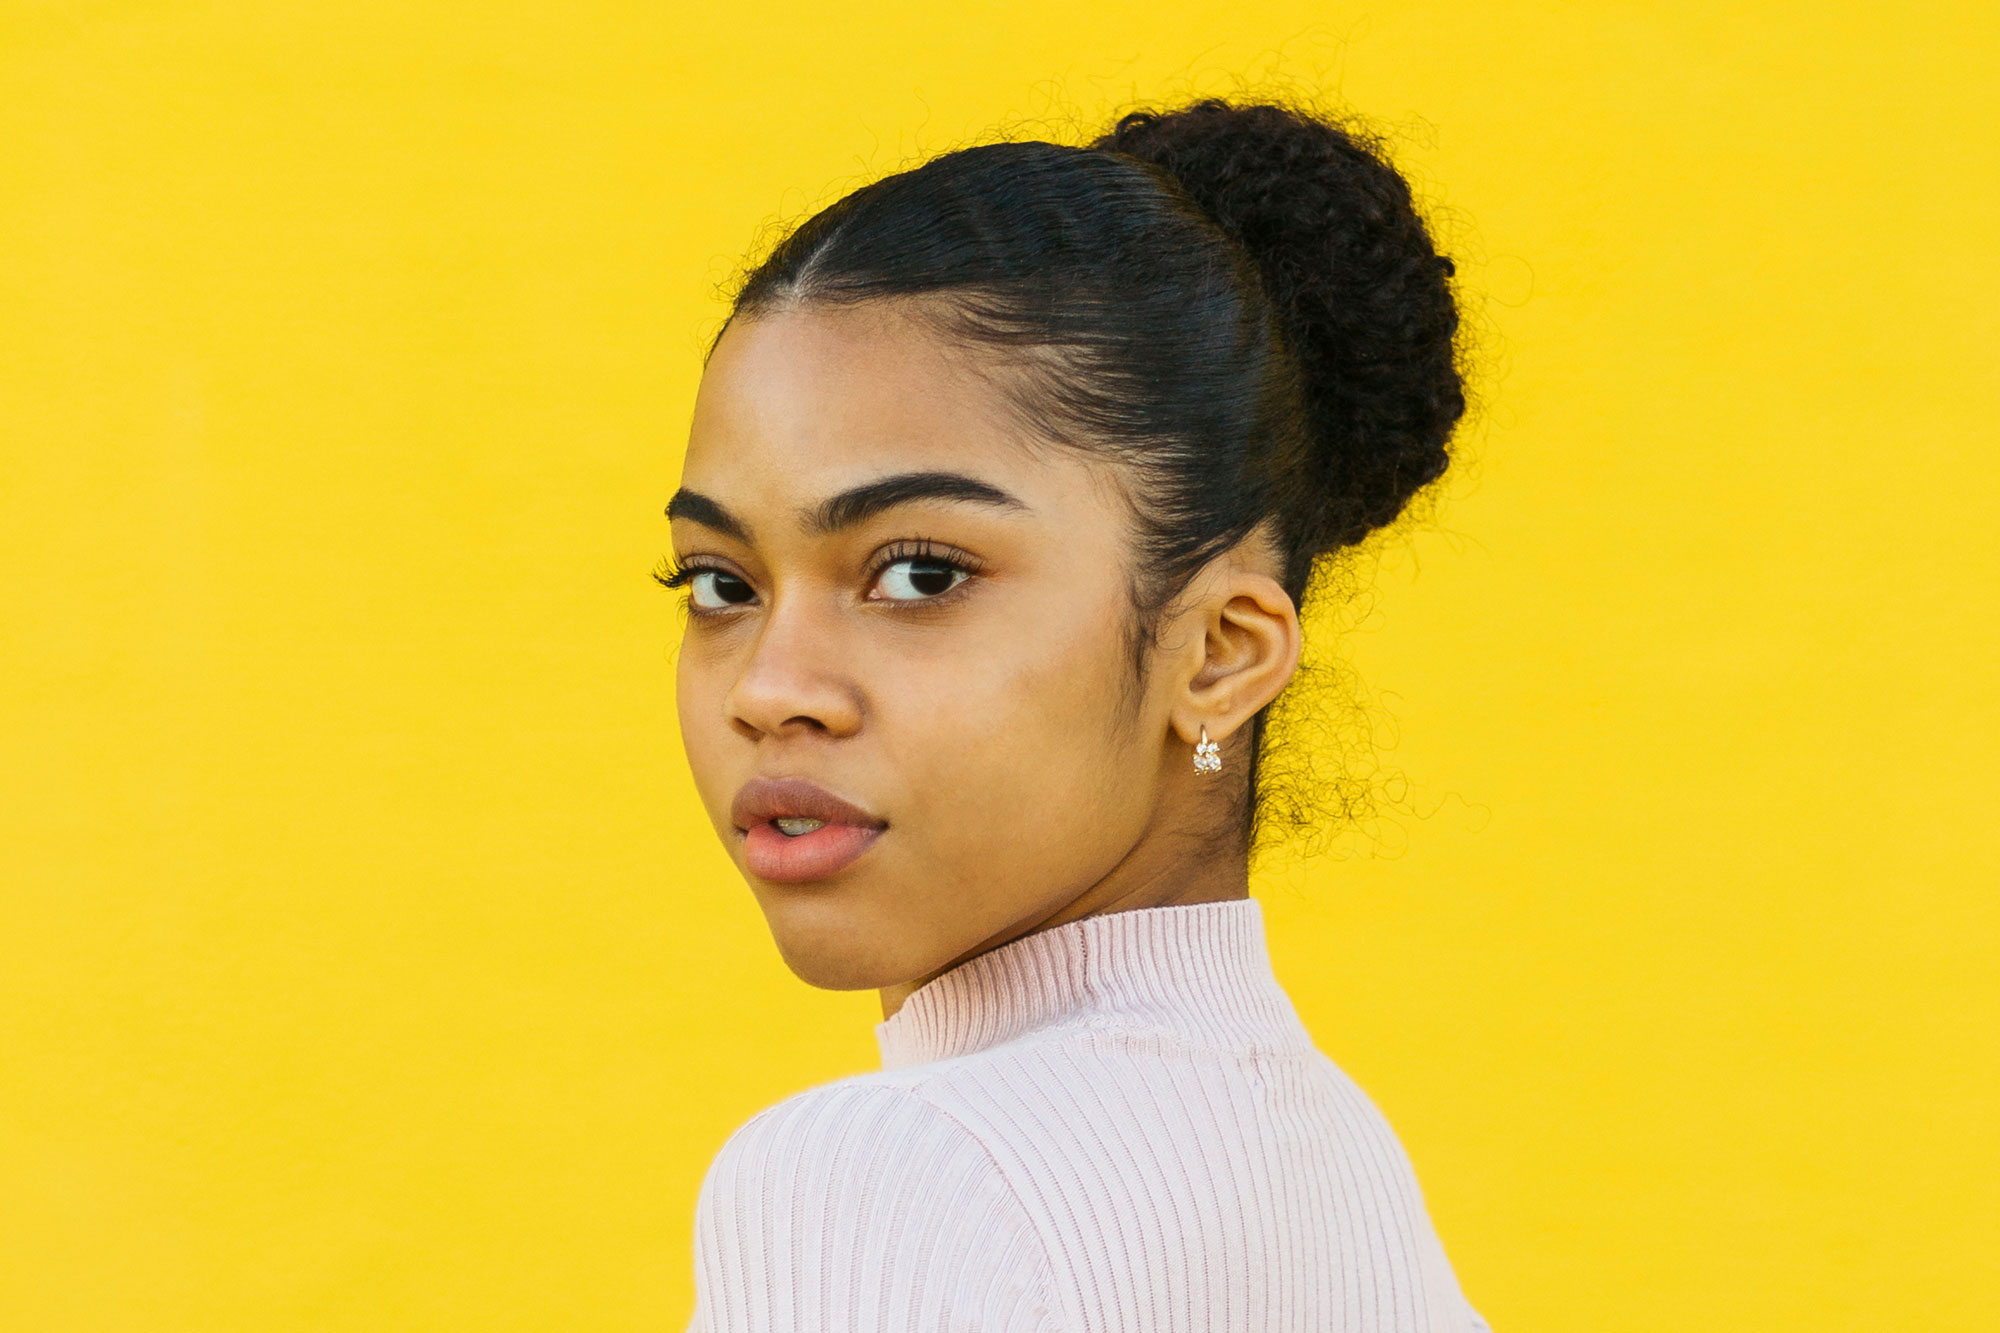 Portrait of teen posing in front of a yellow background